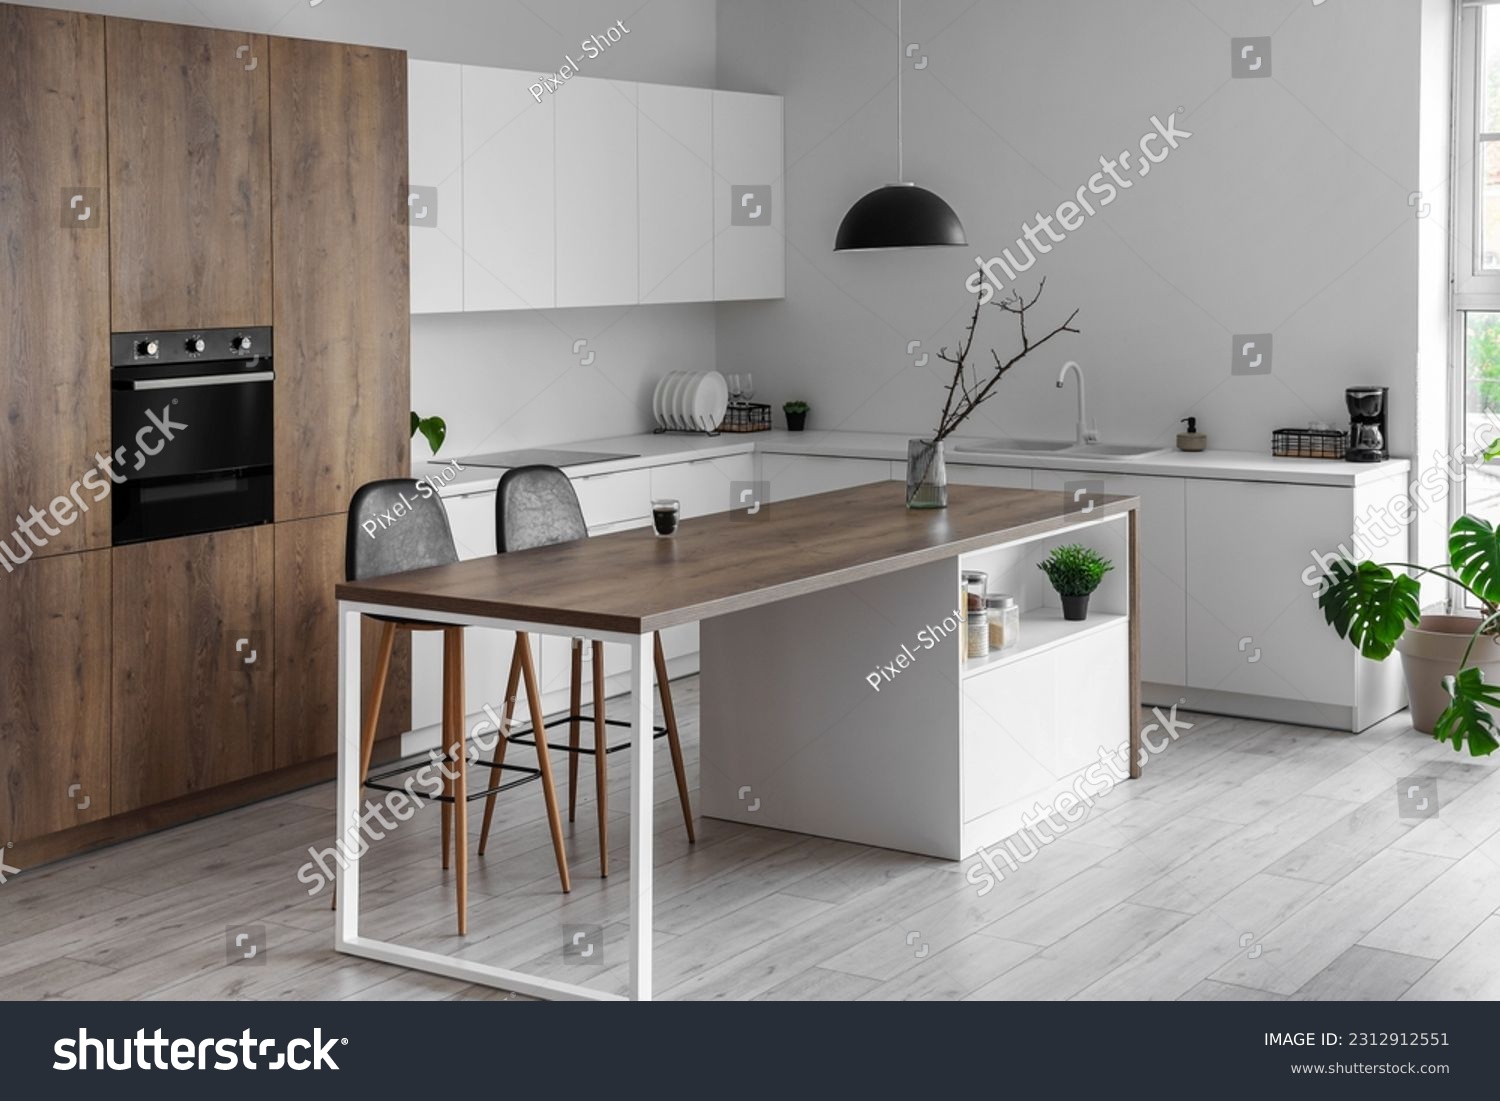 Interior of modern kitchen with island, built-in oven and white counters #2312912551